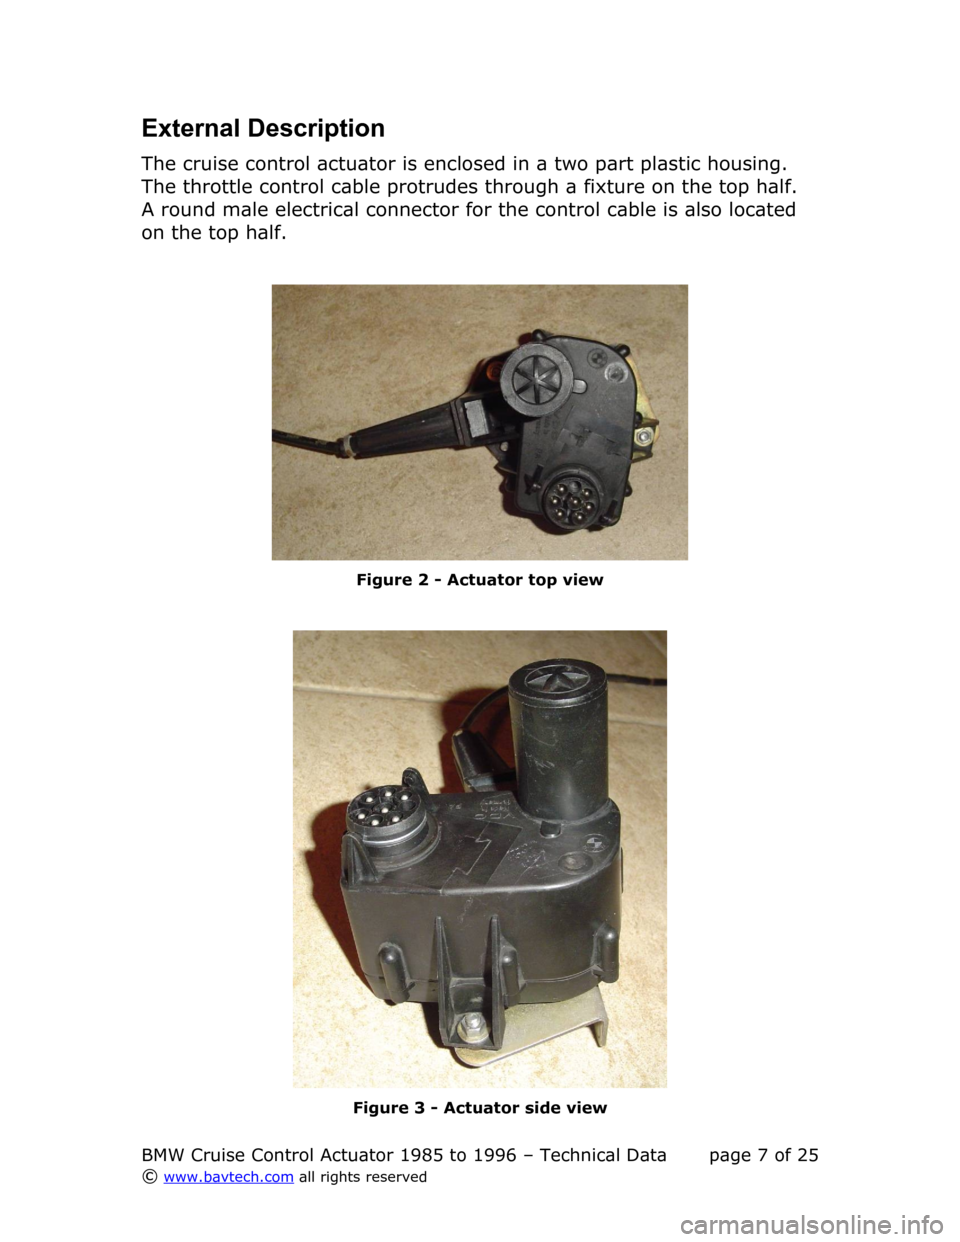 BMW 3 SERIES 1991 E36 Cruise Control Acutator Technical Data Workshop Manual External Description
The cruise control actuator is enclosed in a two part plastic housing.  
The throttle control cable protrudes through a fixture on the top half.  
A round male electrical connecto